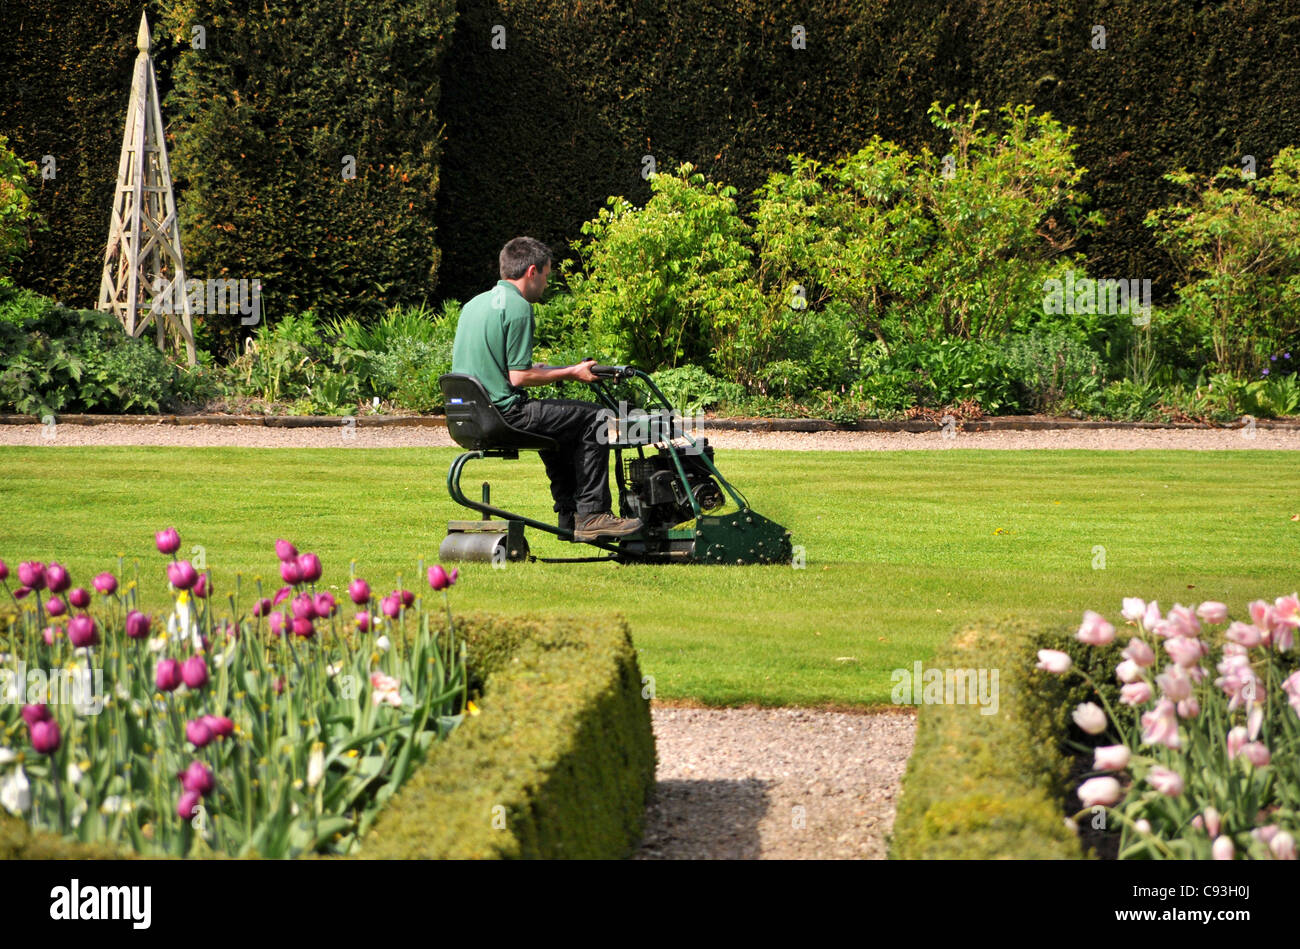 A gardener mowing a lawn on a petrol tractor grass mower. Stock Photo